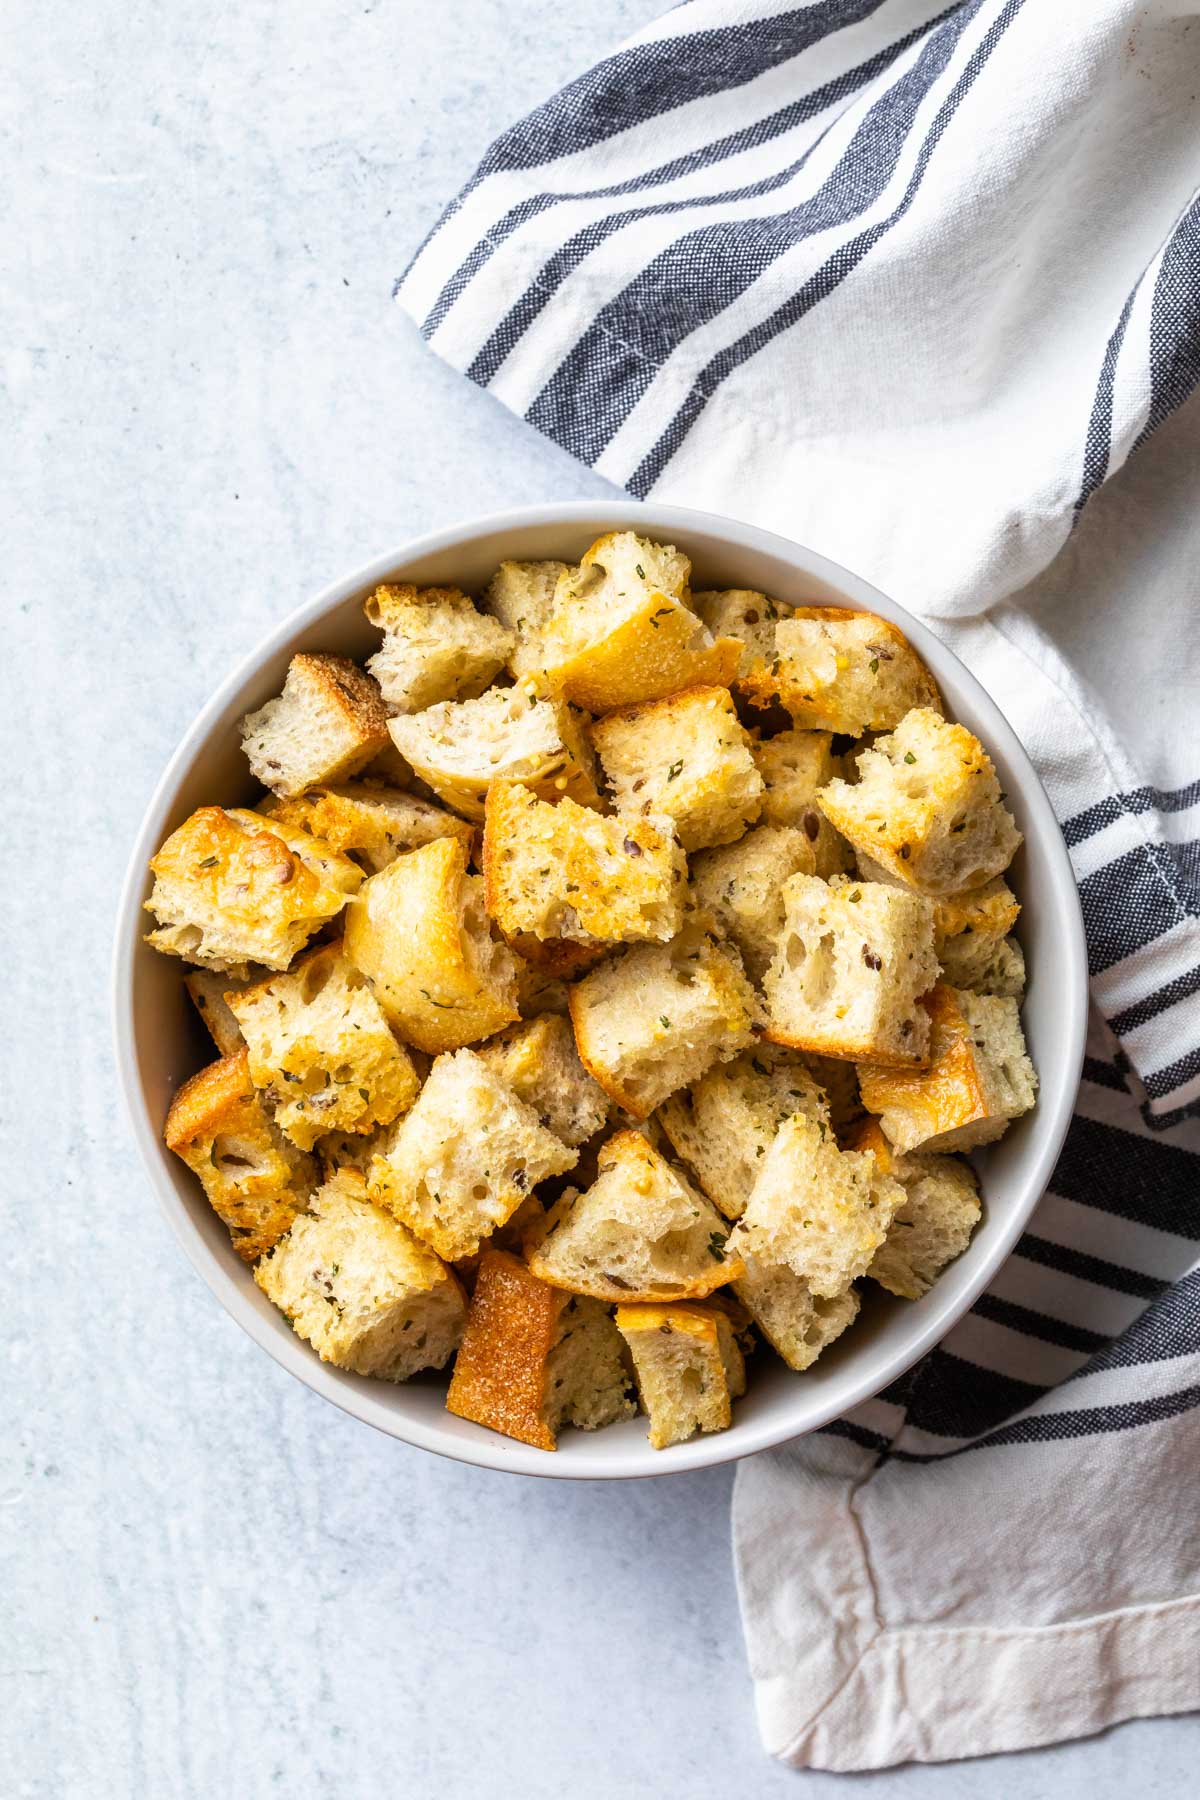 homemade croutons in a bowl